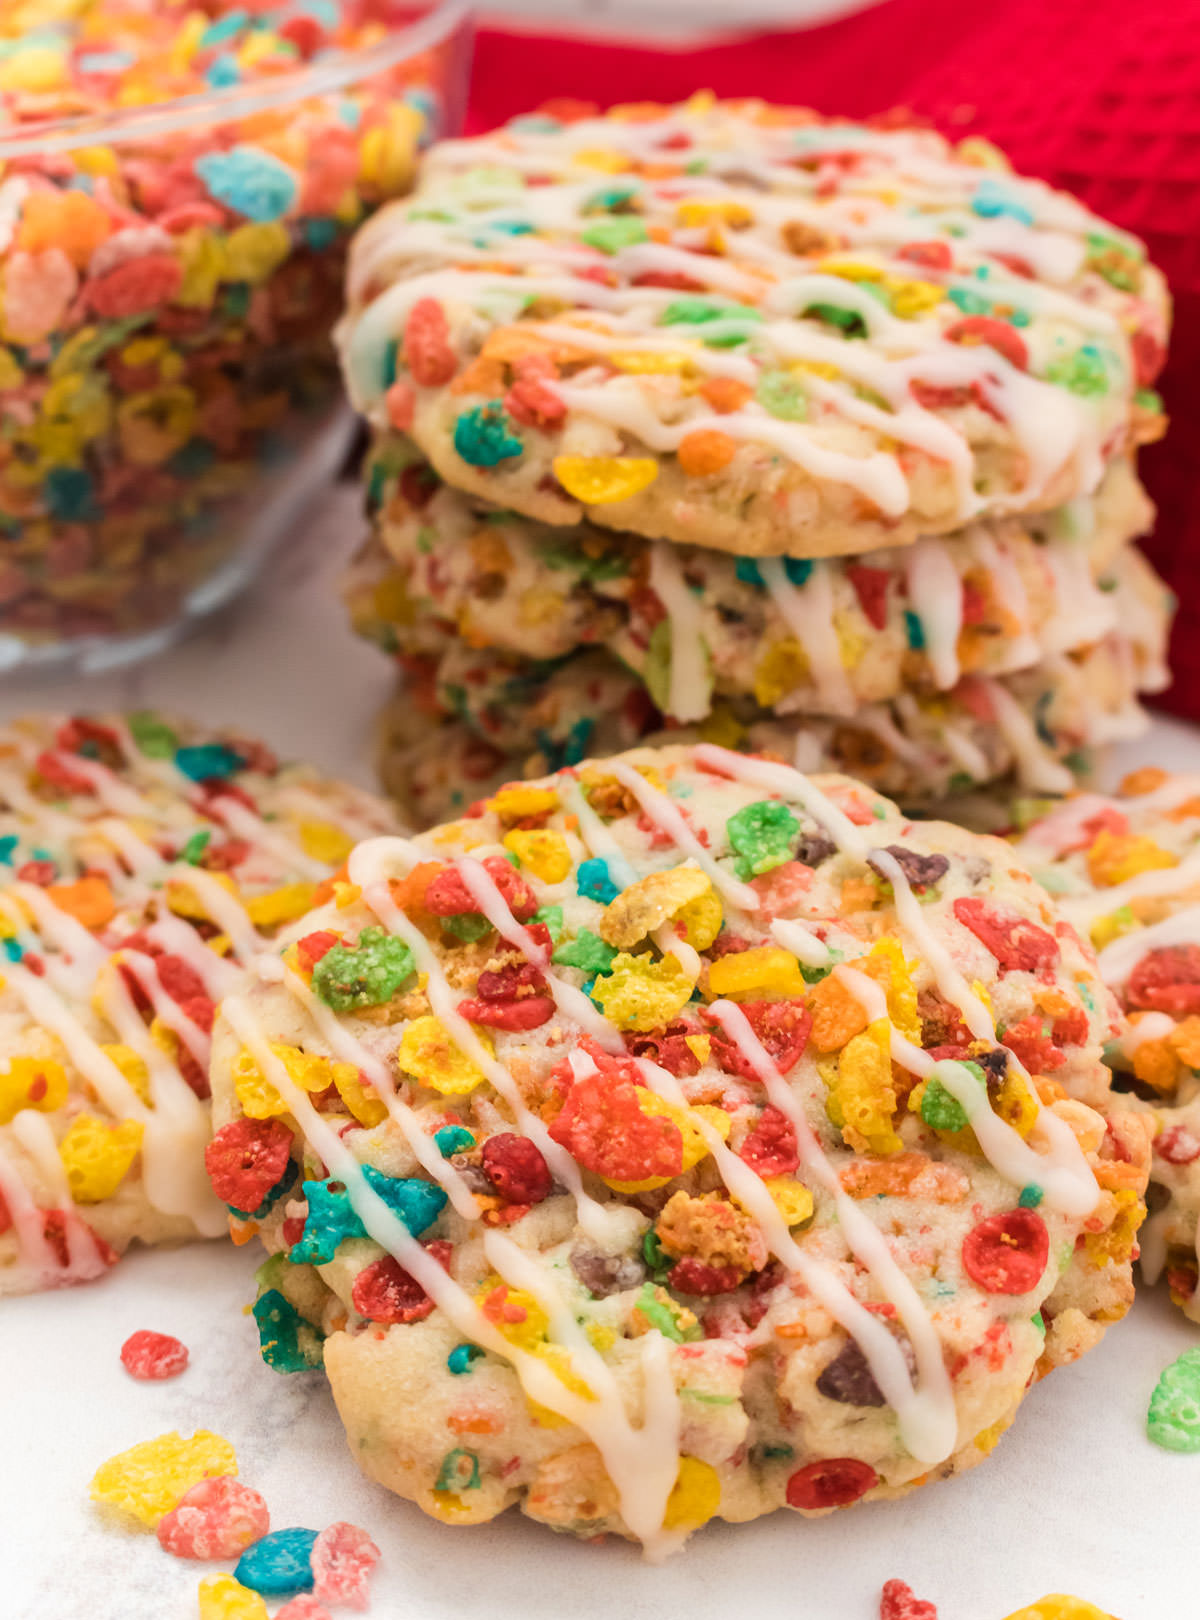 Closeup on a Fruity Pebbles Sugar Cookie propped up against another stack of cookies and in front of a glass bowl filled with. Fruity Pebbles Cereal.